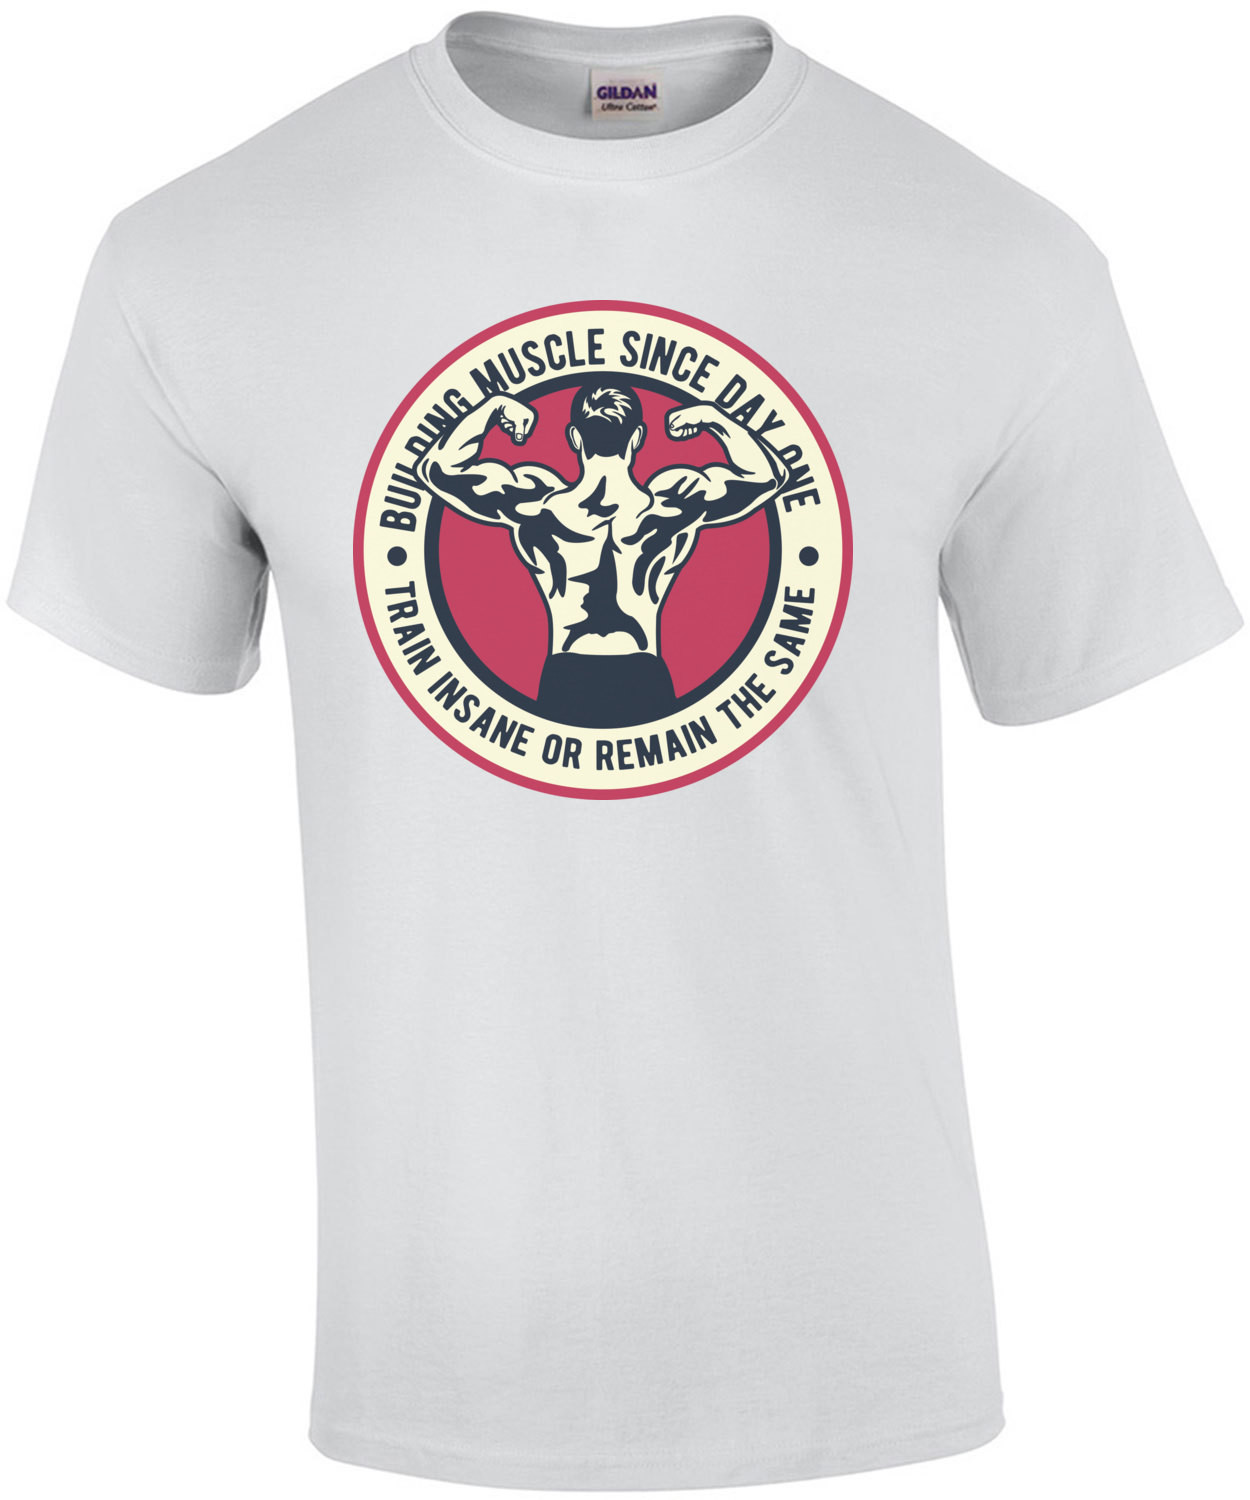 Building Muscle Since Day One Train Insane Or Remain The Same Exercise Working Out T-Shirt